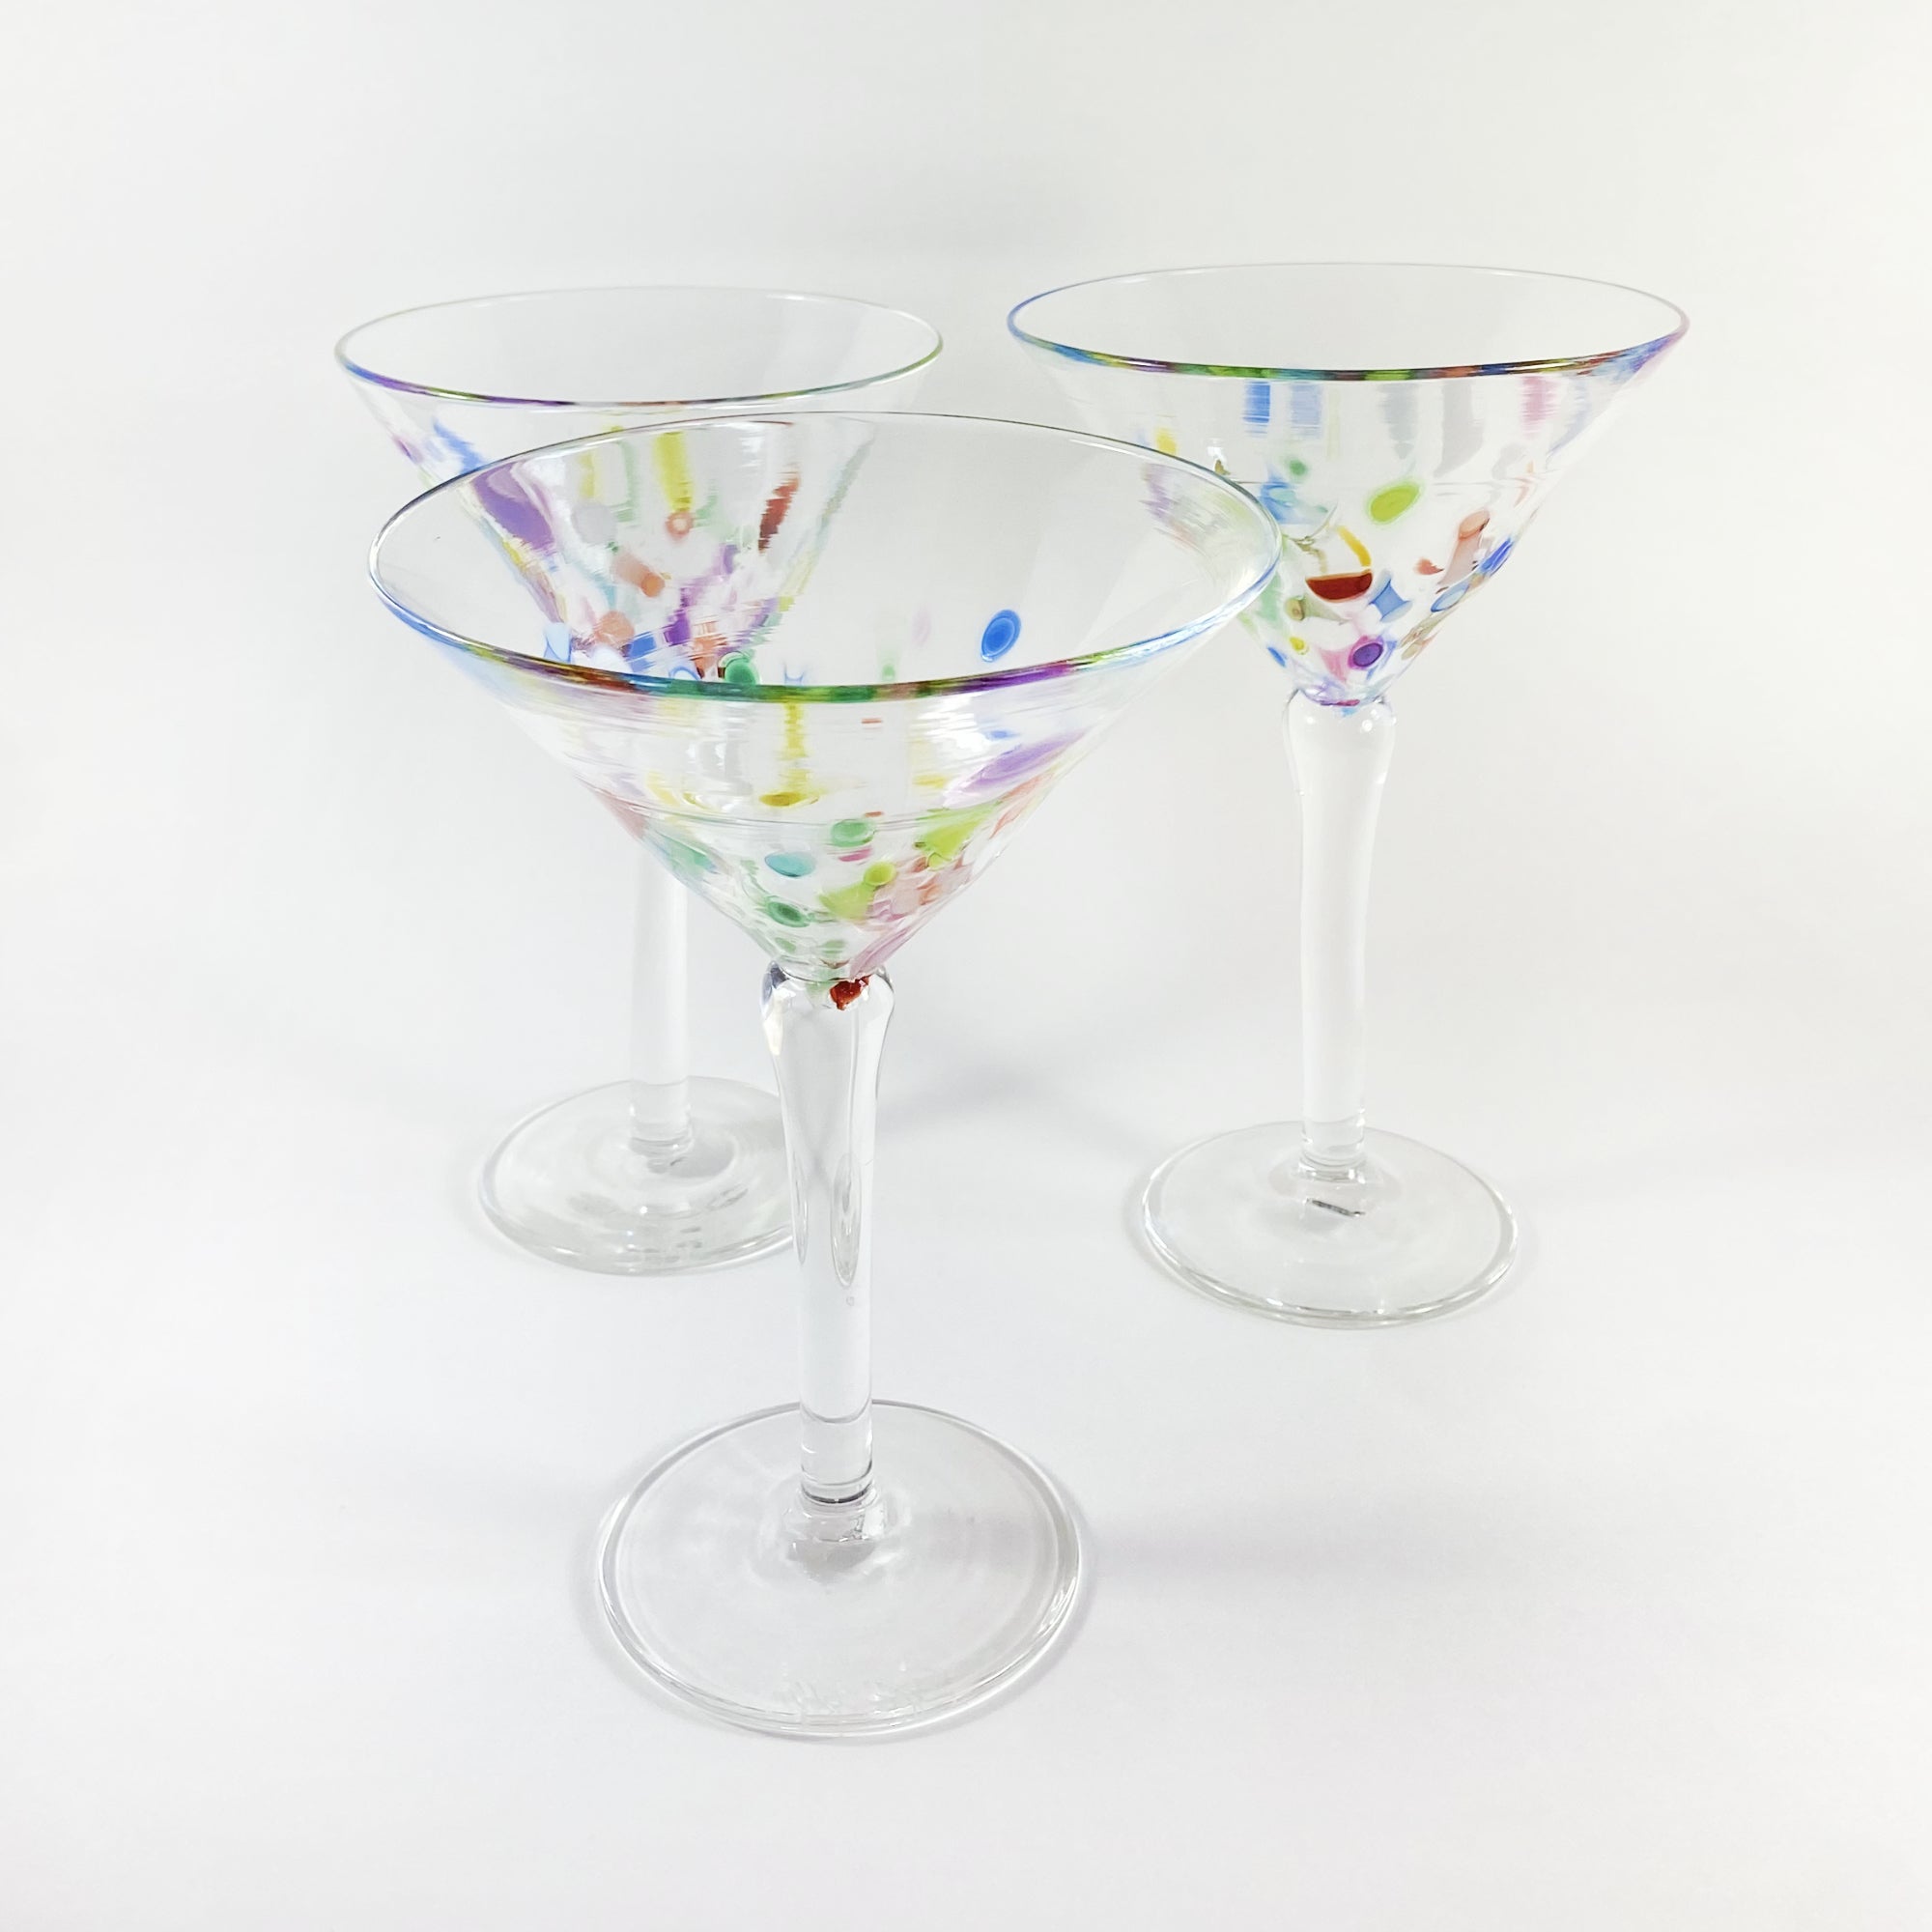 There Are Now Martini Glasses Designed for Space Travel